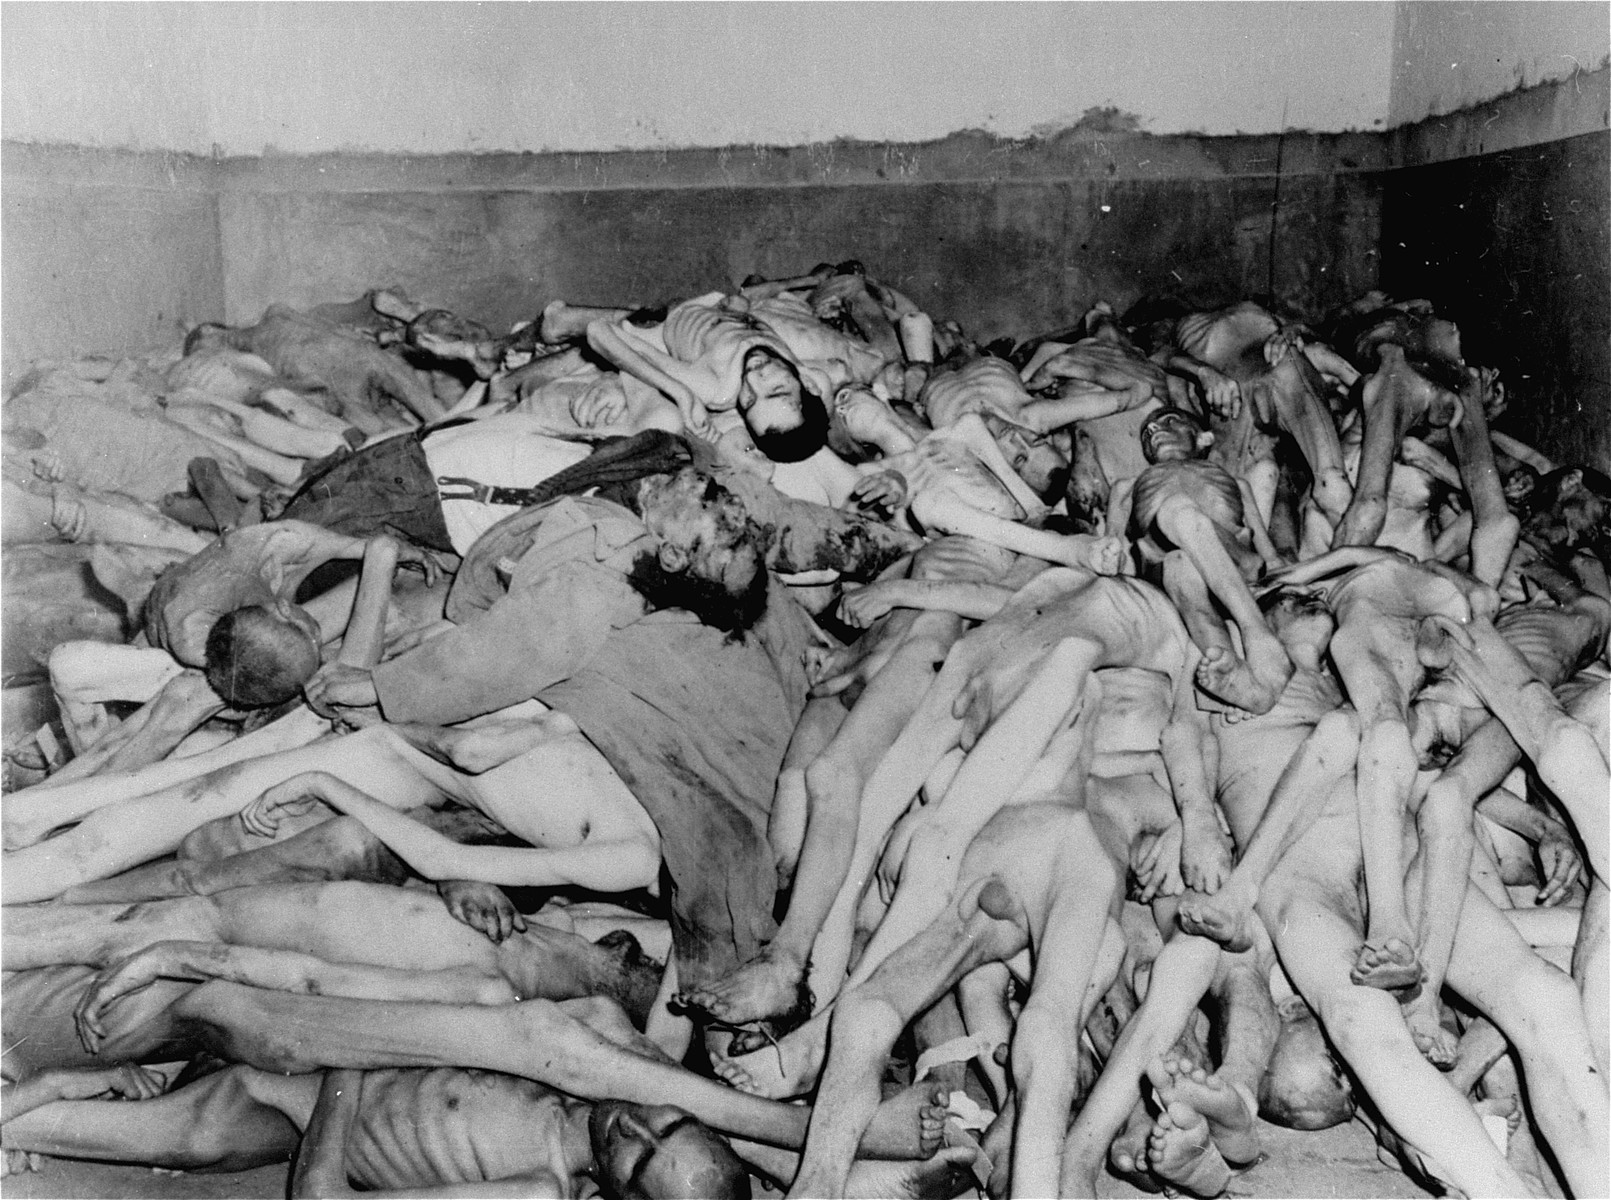 Corpses piled in the crematorium mortuary.  These rooms became so full of bodies that the SS staff and survivors began piling corpses behind the crematorium, where they were found by U.S. troops.